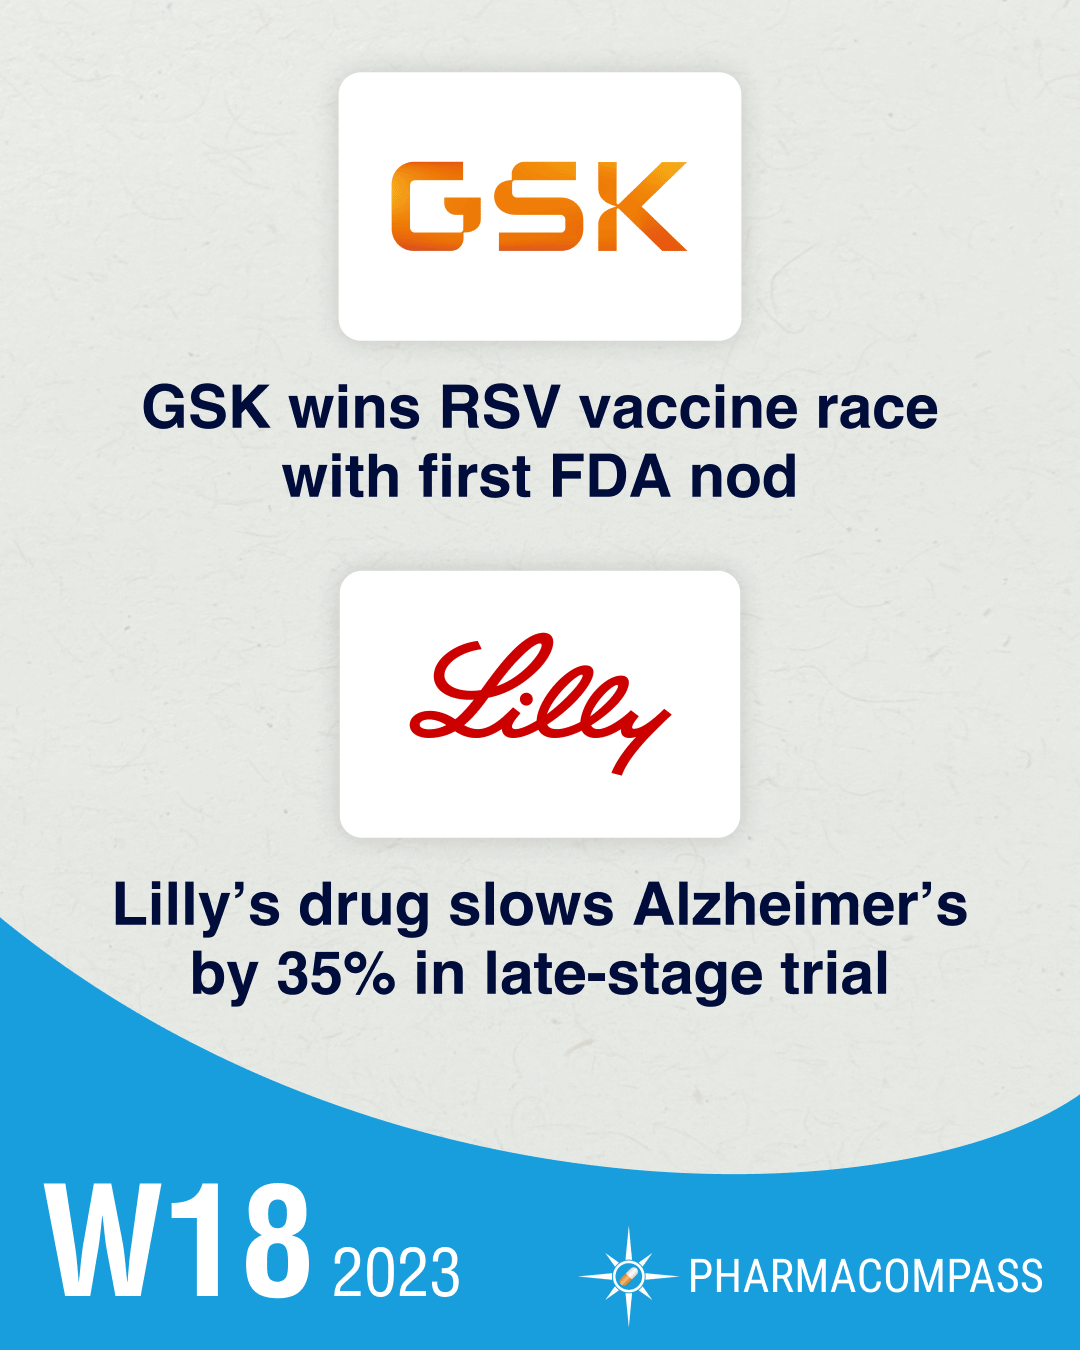 GSK wins RSV vaccine race with first FDA nod; Lilly’s drug slows Alzheimer’s by 35% in late-stage trial